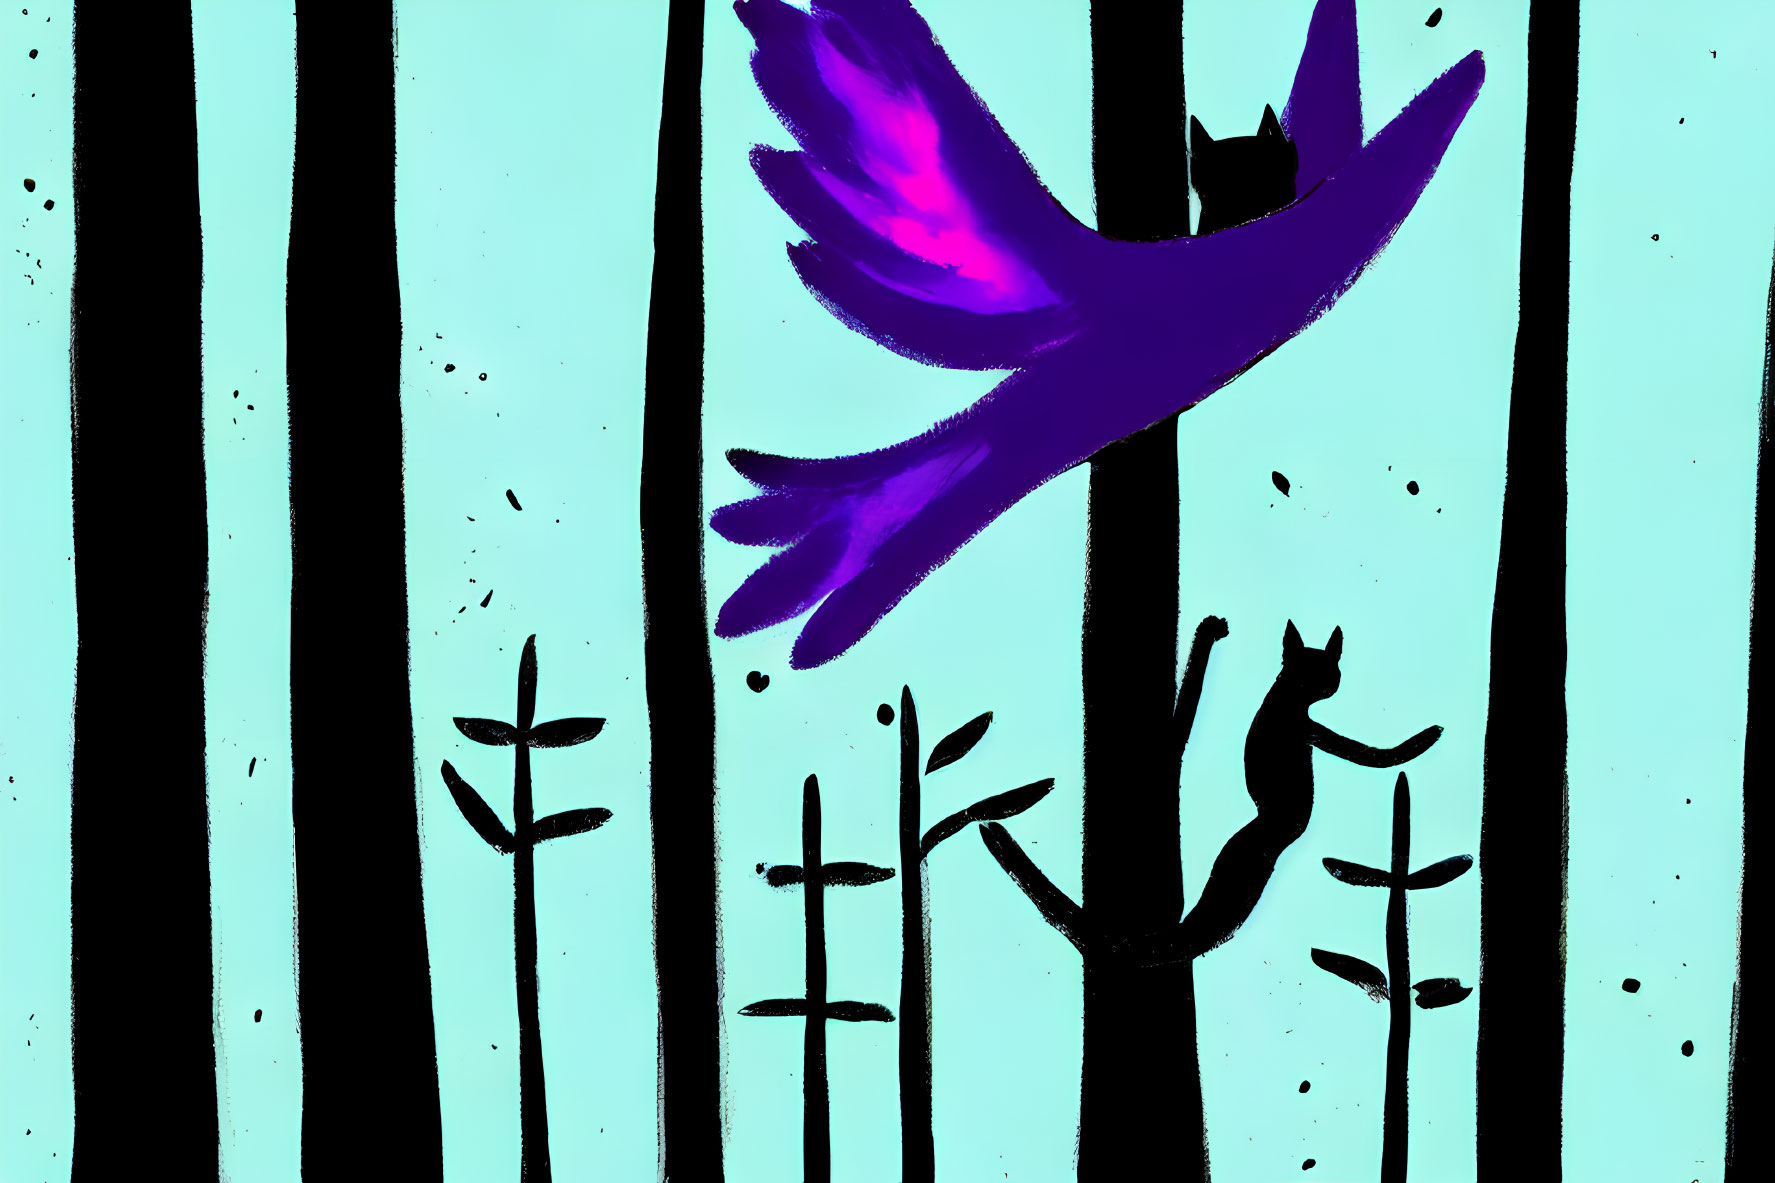 Purple bird in flight over black trees and teal sky with plants